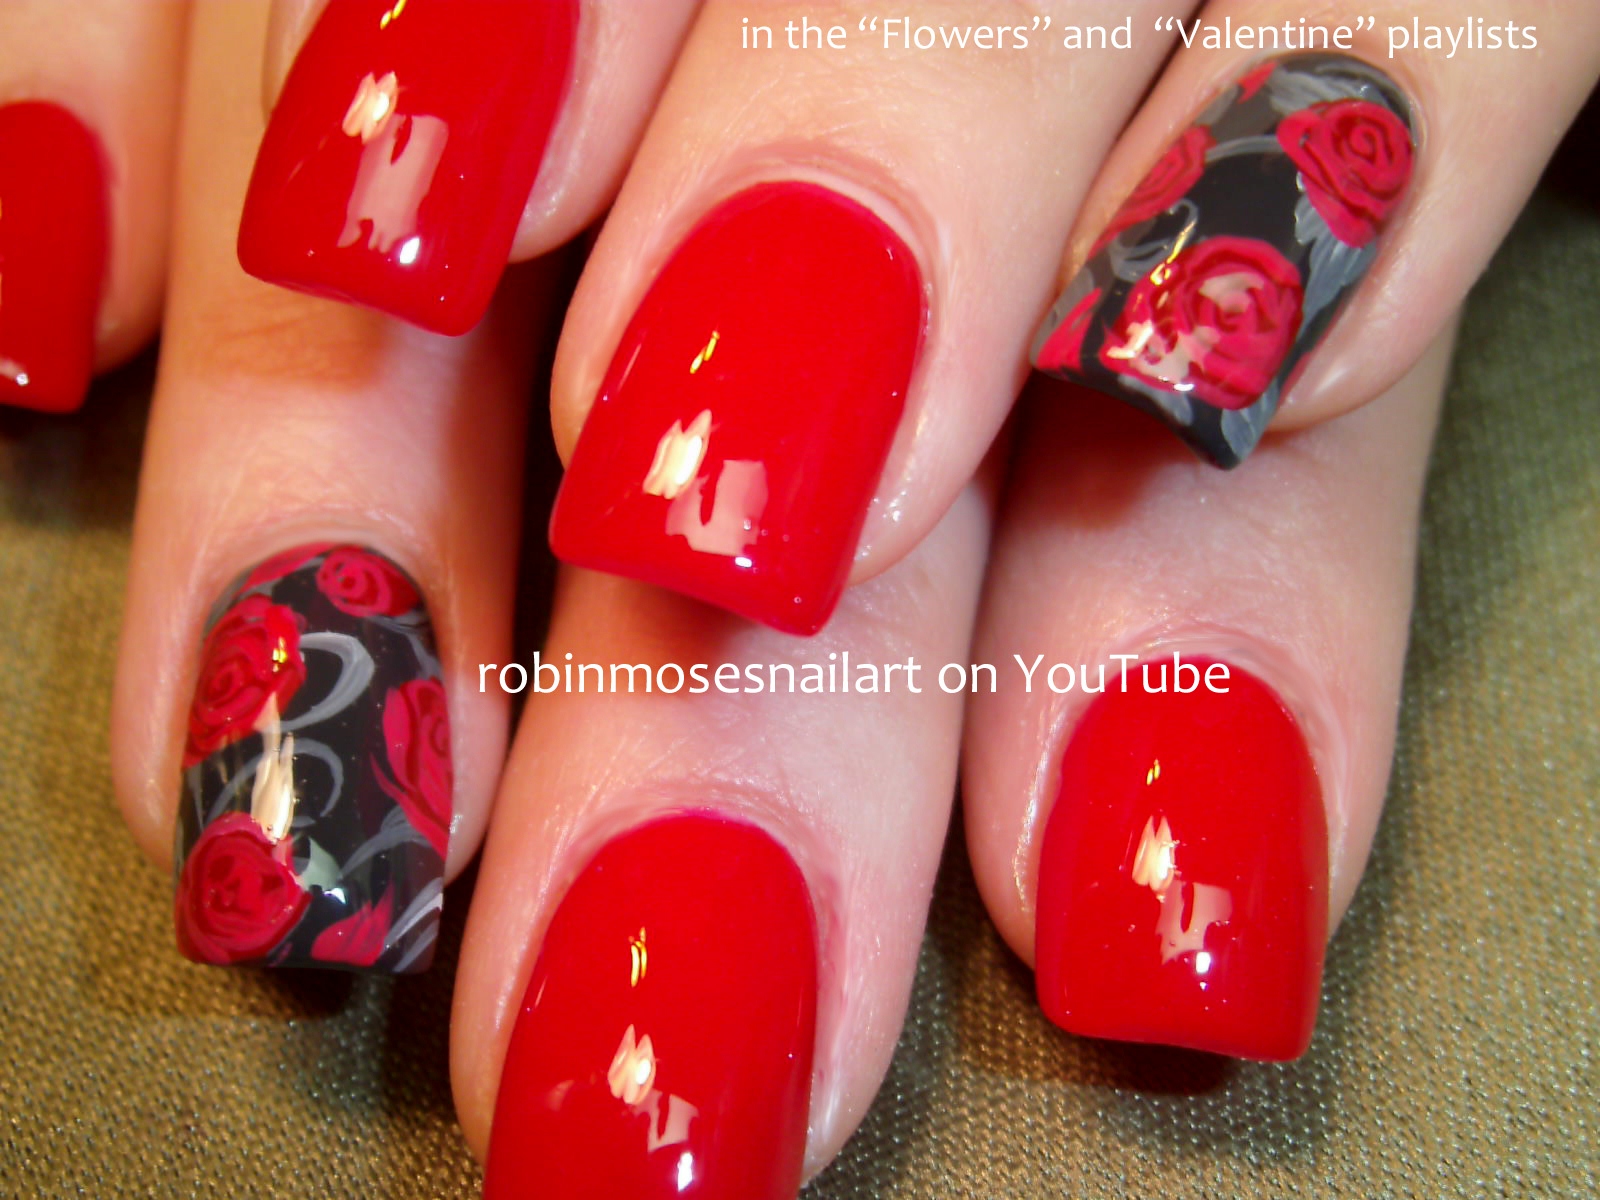 2. Romantic Black and Red Nail Art Ideas for Valentine's Day - wide 5